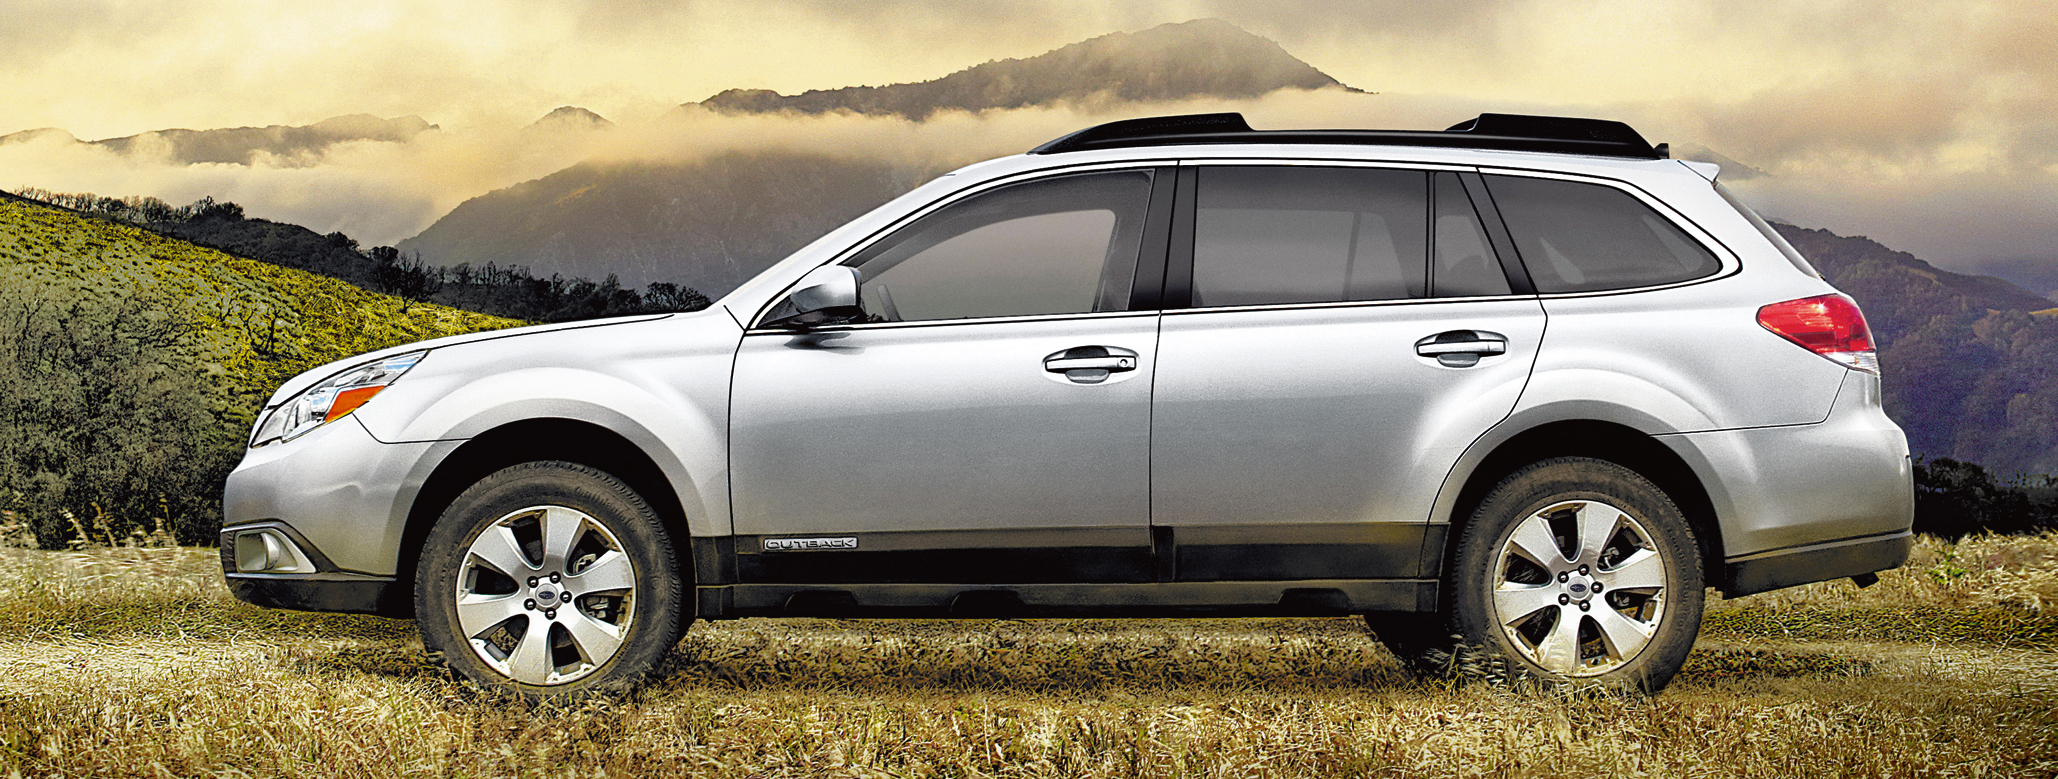 2013 Subaru Outback Review | Best Car Site for Women | VroomGirls